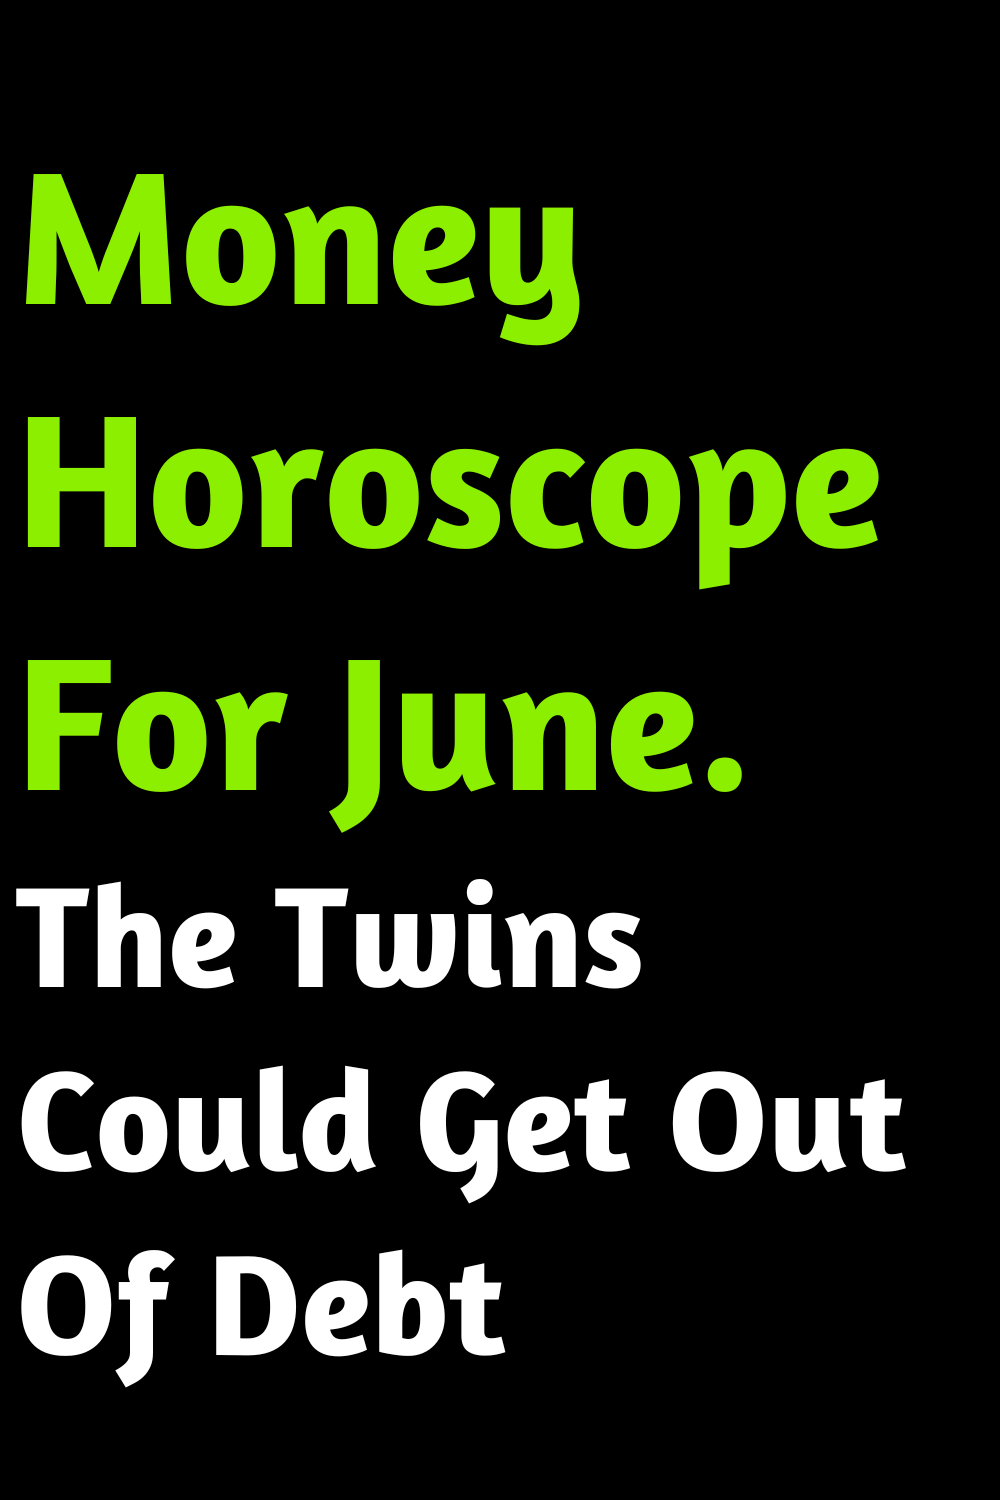 Money Horoscope For June. The Twins Could Get Out Of Debt